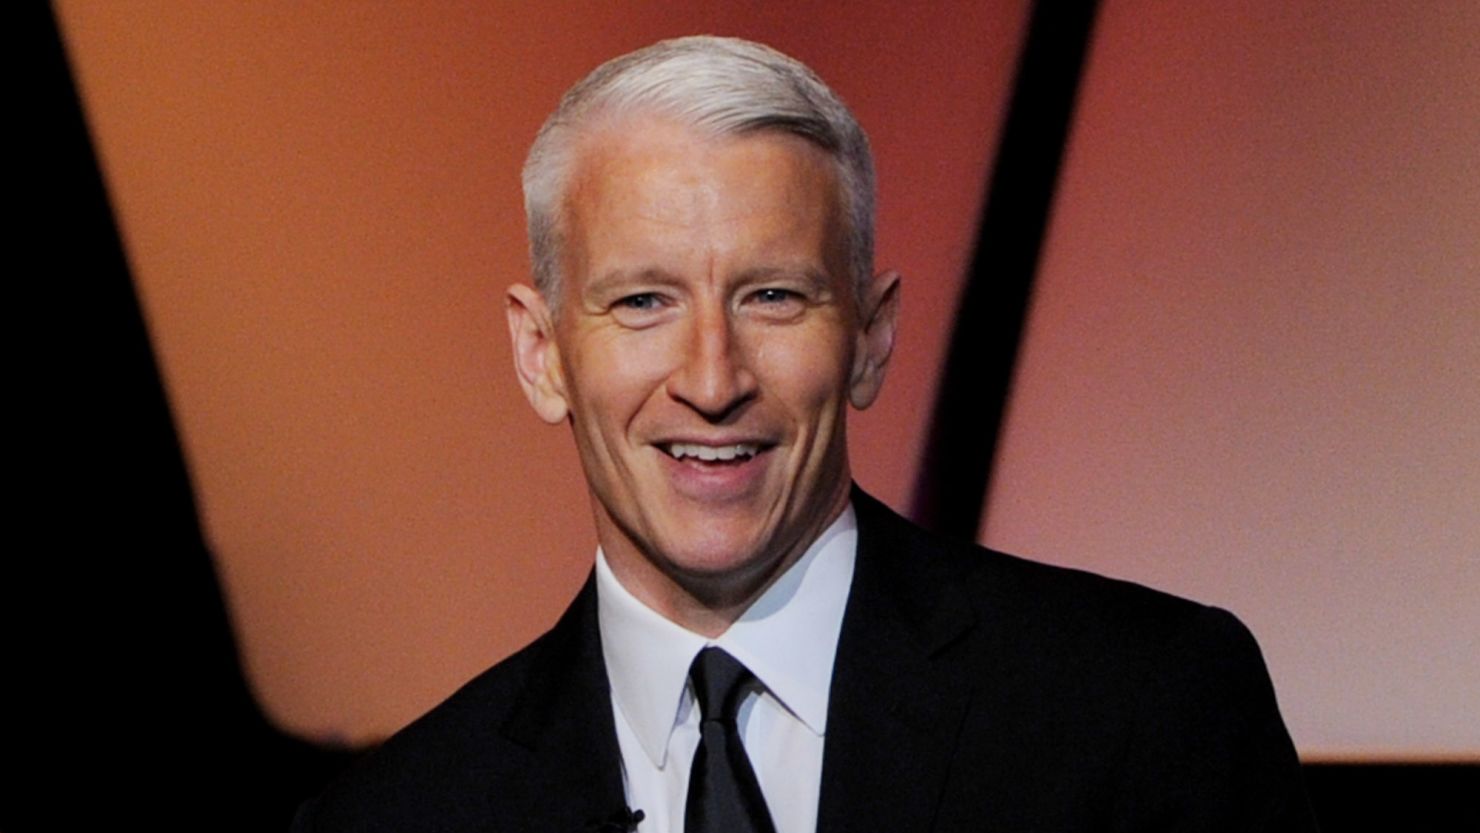 Gregory Maguire asks: Will Anderson Cooper be a better professional journalist for having been honest in this aspect of his life?